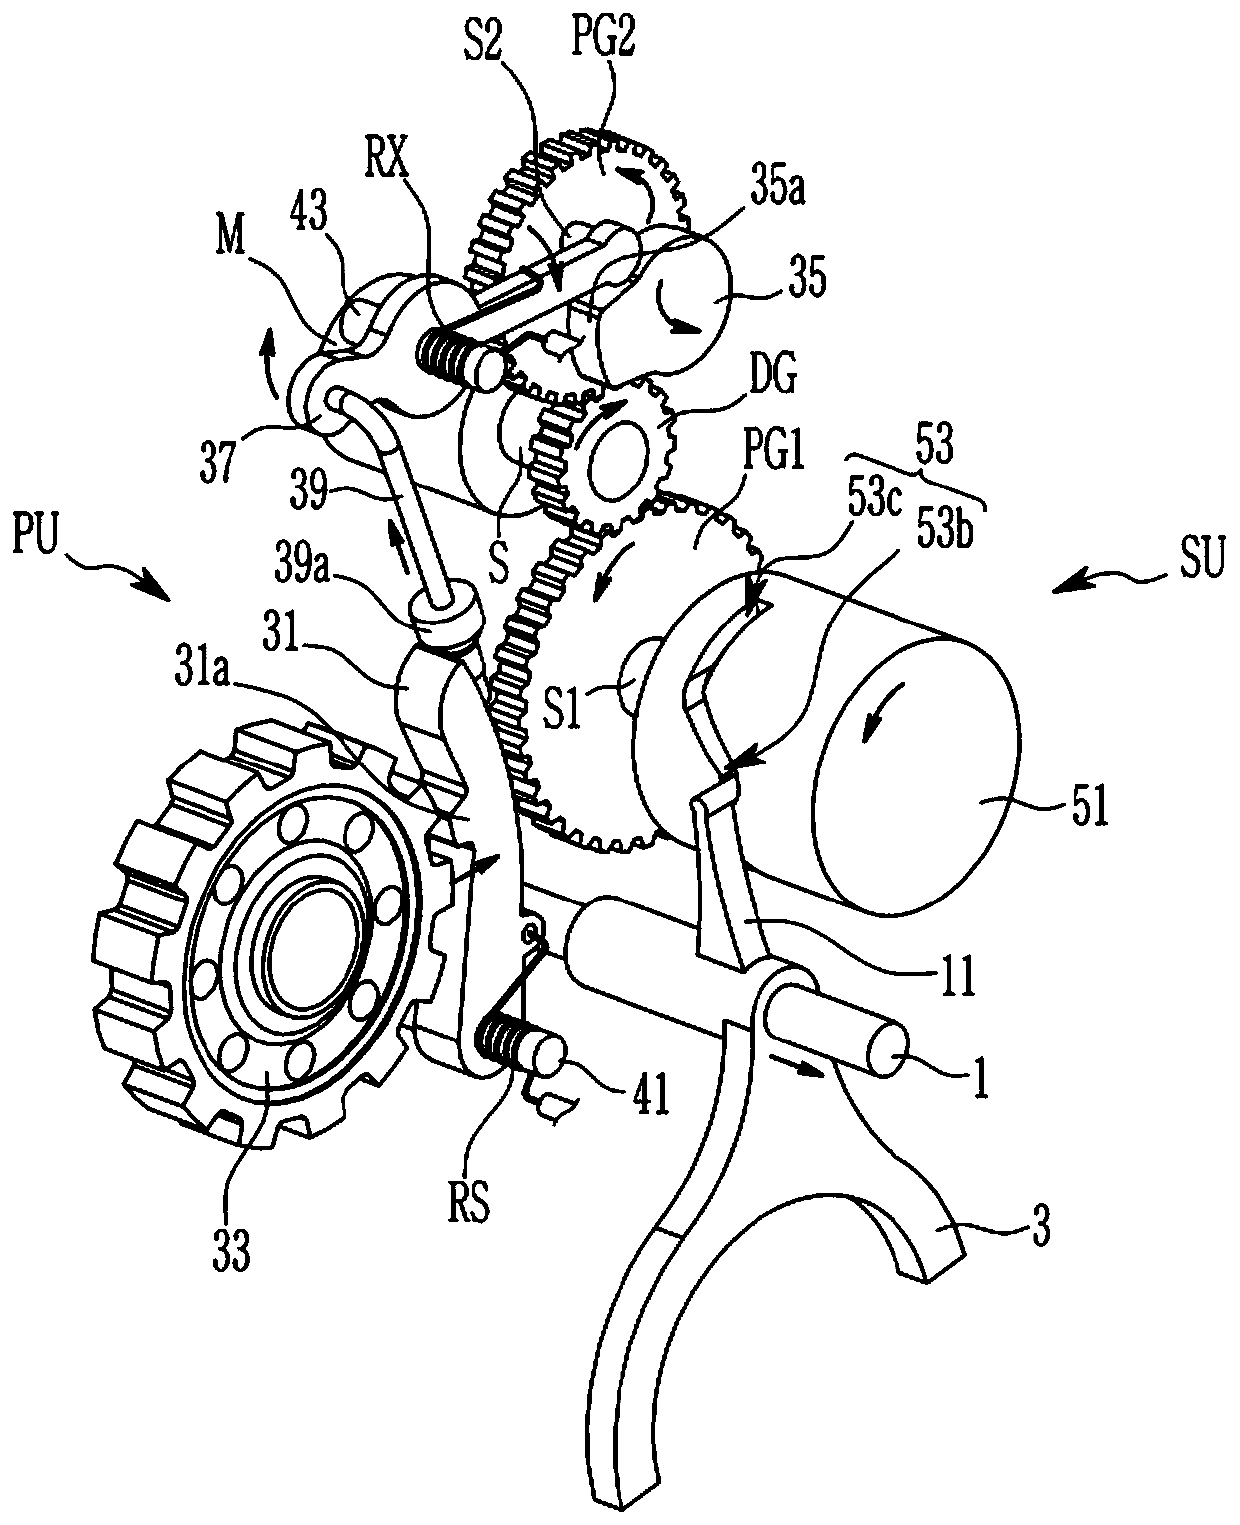 Gear shifting device for multi-speed transmission of electric vehicles